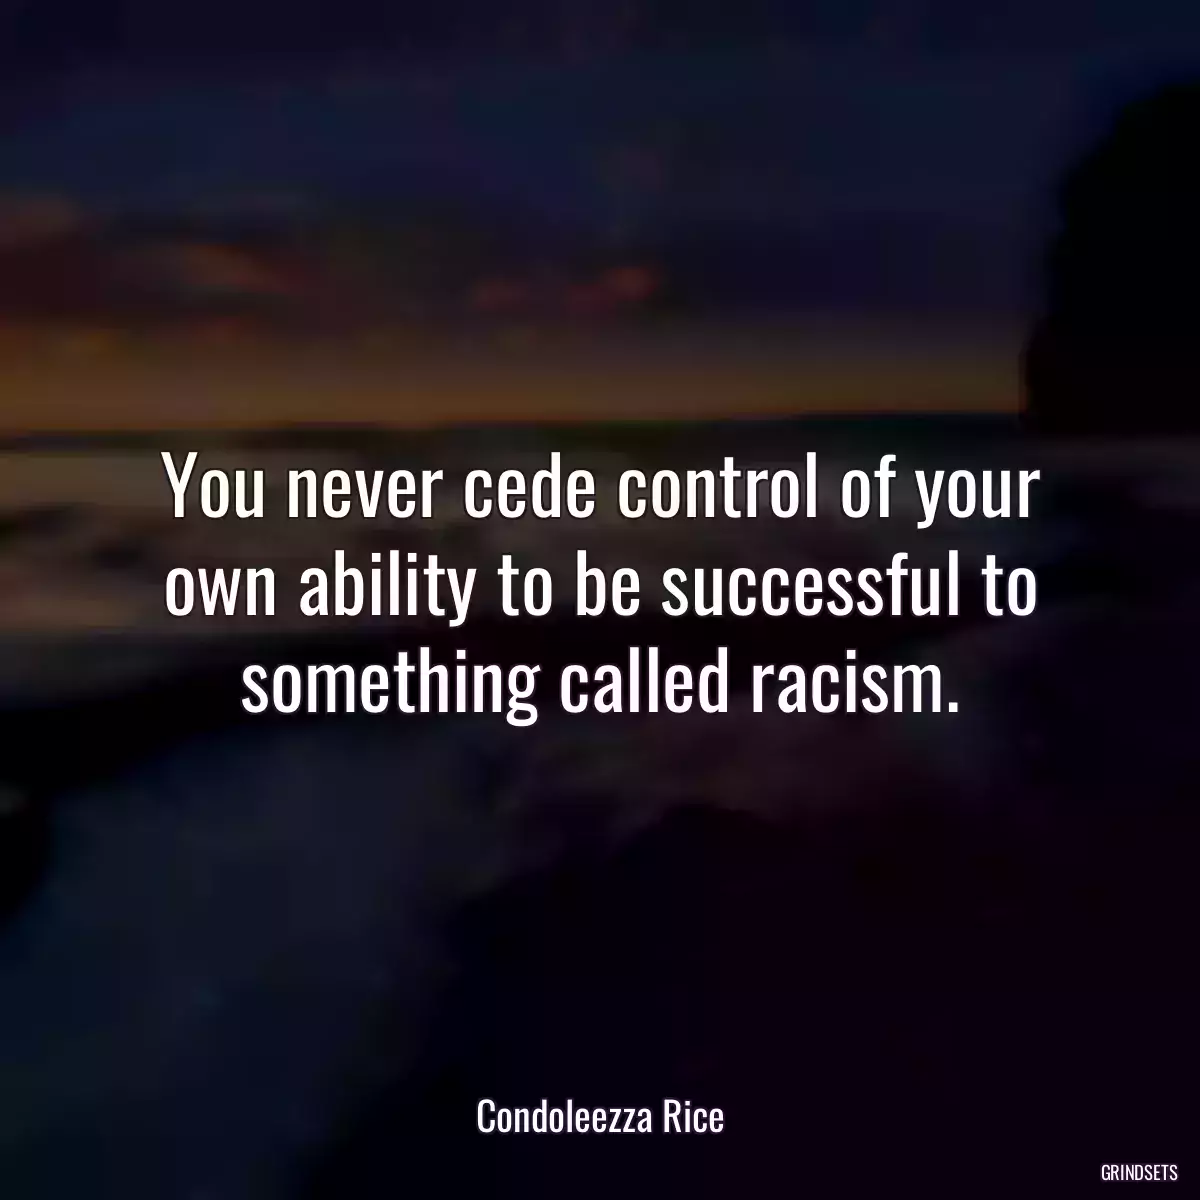 You never cede control of your own ability to be successful to something called racism.